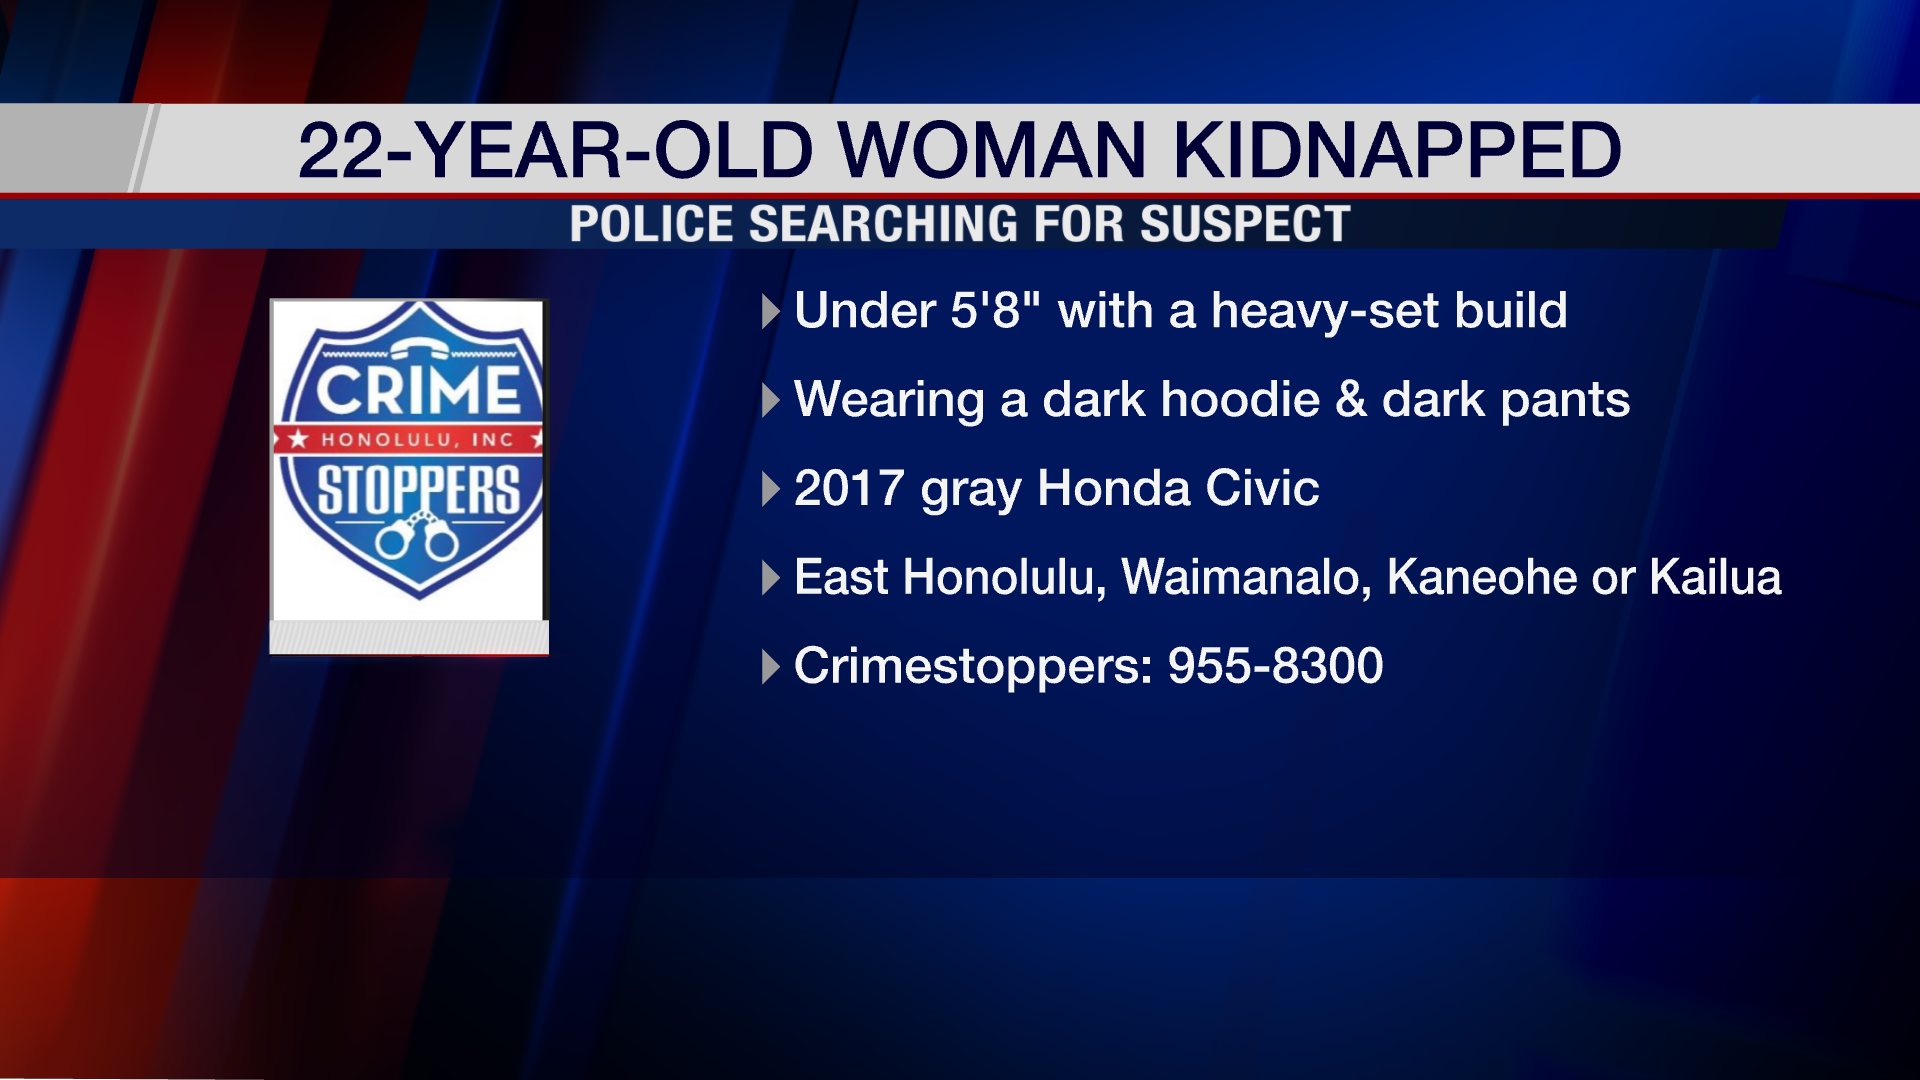 Police Release Suspect Information For Edly Kidnapping A U